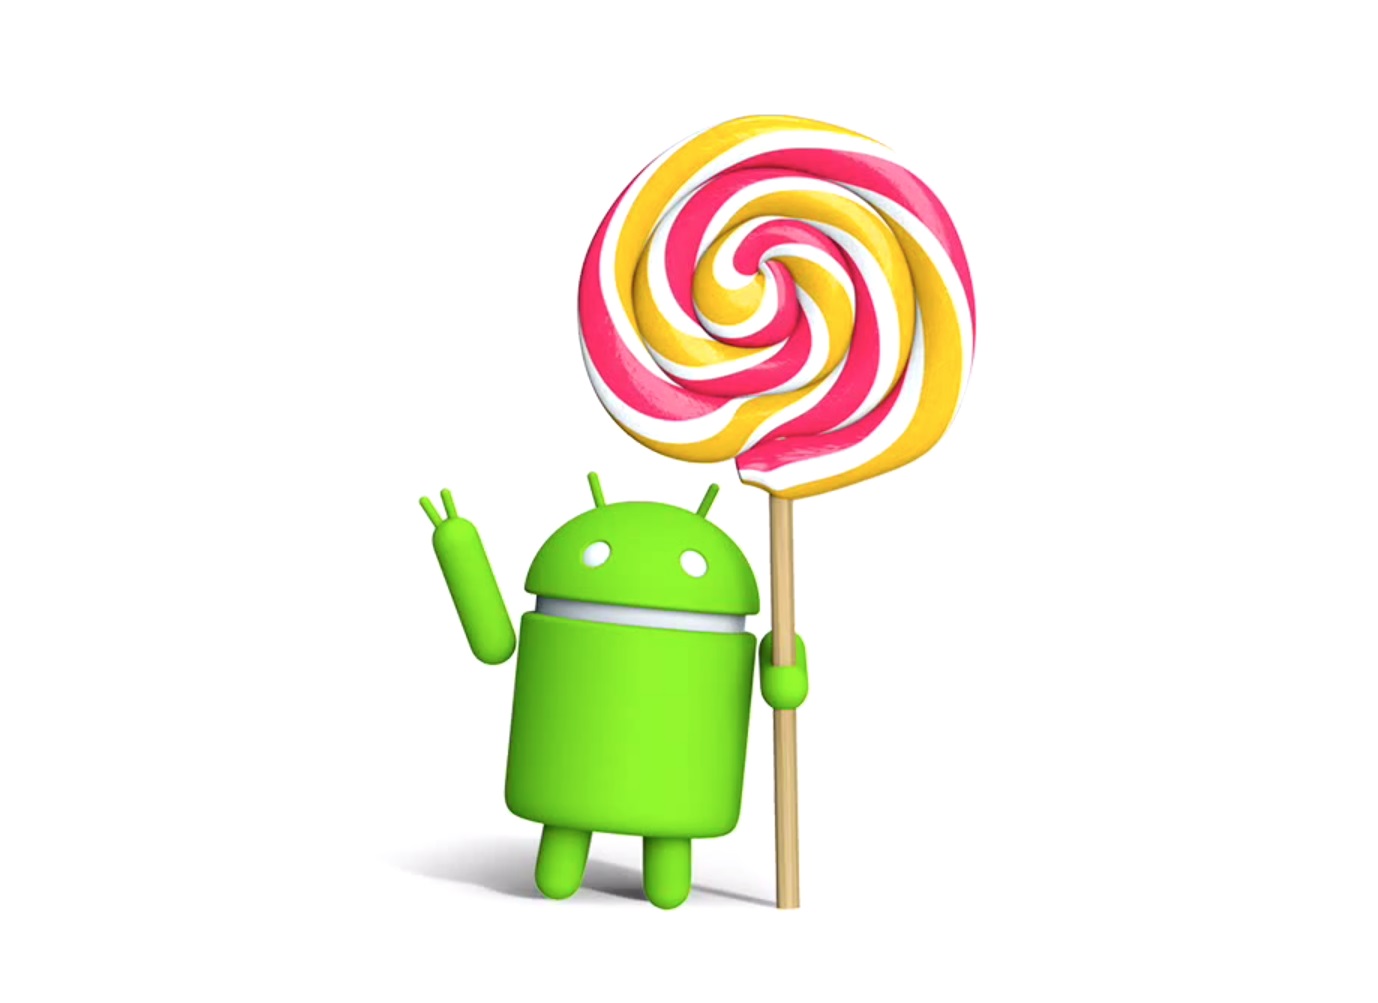 download zip video file for android 5.0 lollipop ota